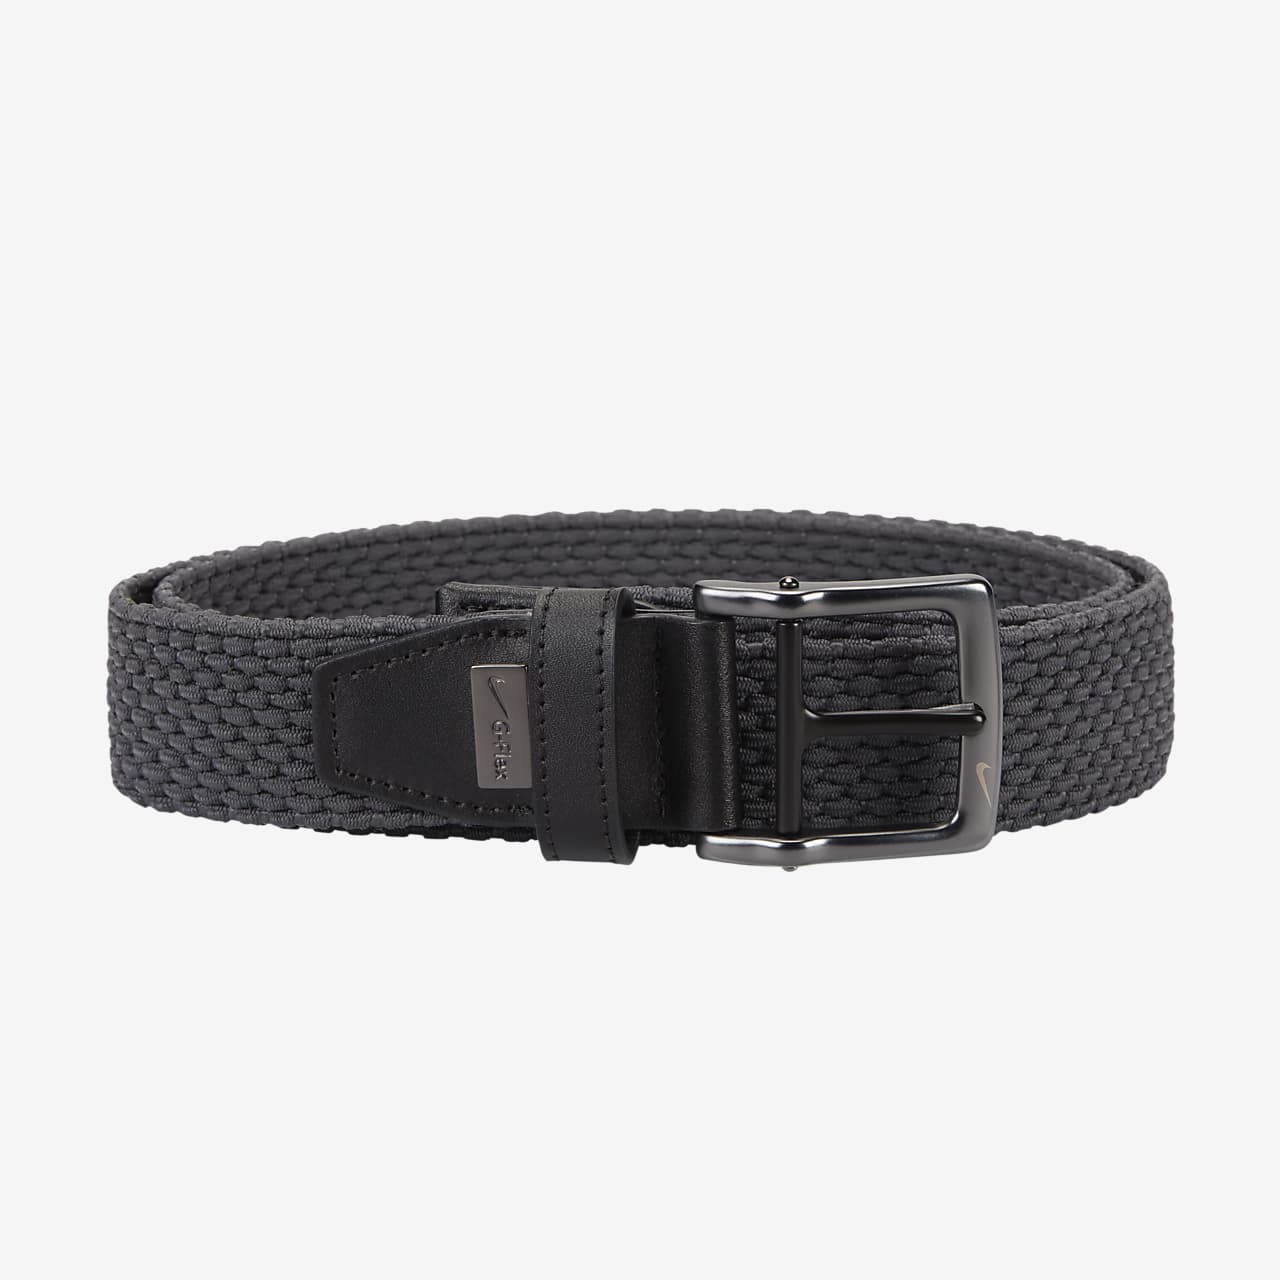 https://static.nike.com/a/images/t_PDP_1280_v1/f_auto/e54b67fb-7093-485c-b73d-e1b570e0a3fb/stretch-woven-belt-V7nmLW.png